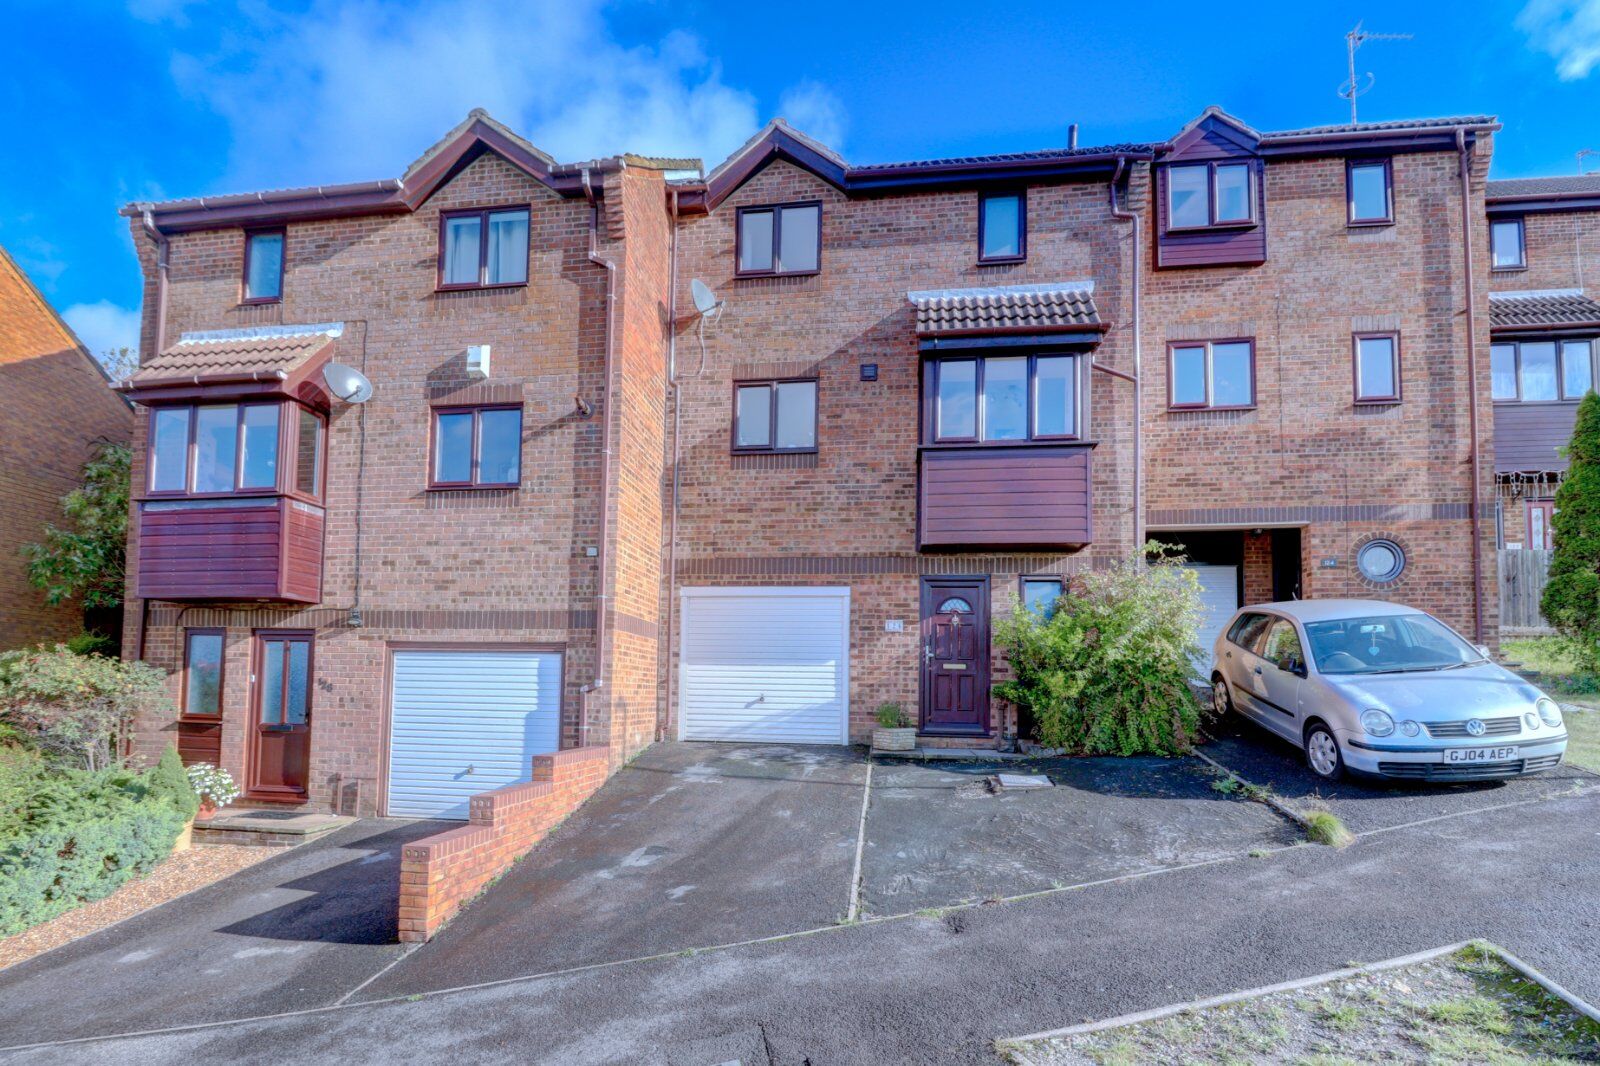 3 bedroom mid terraced house for sale Garratts Way, High Wycombe, HP13, main image